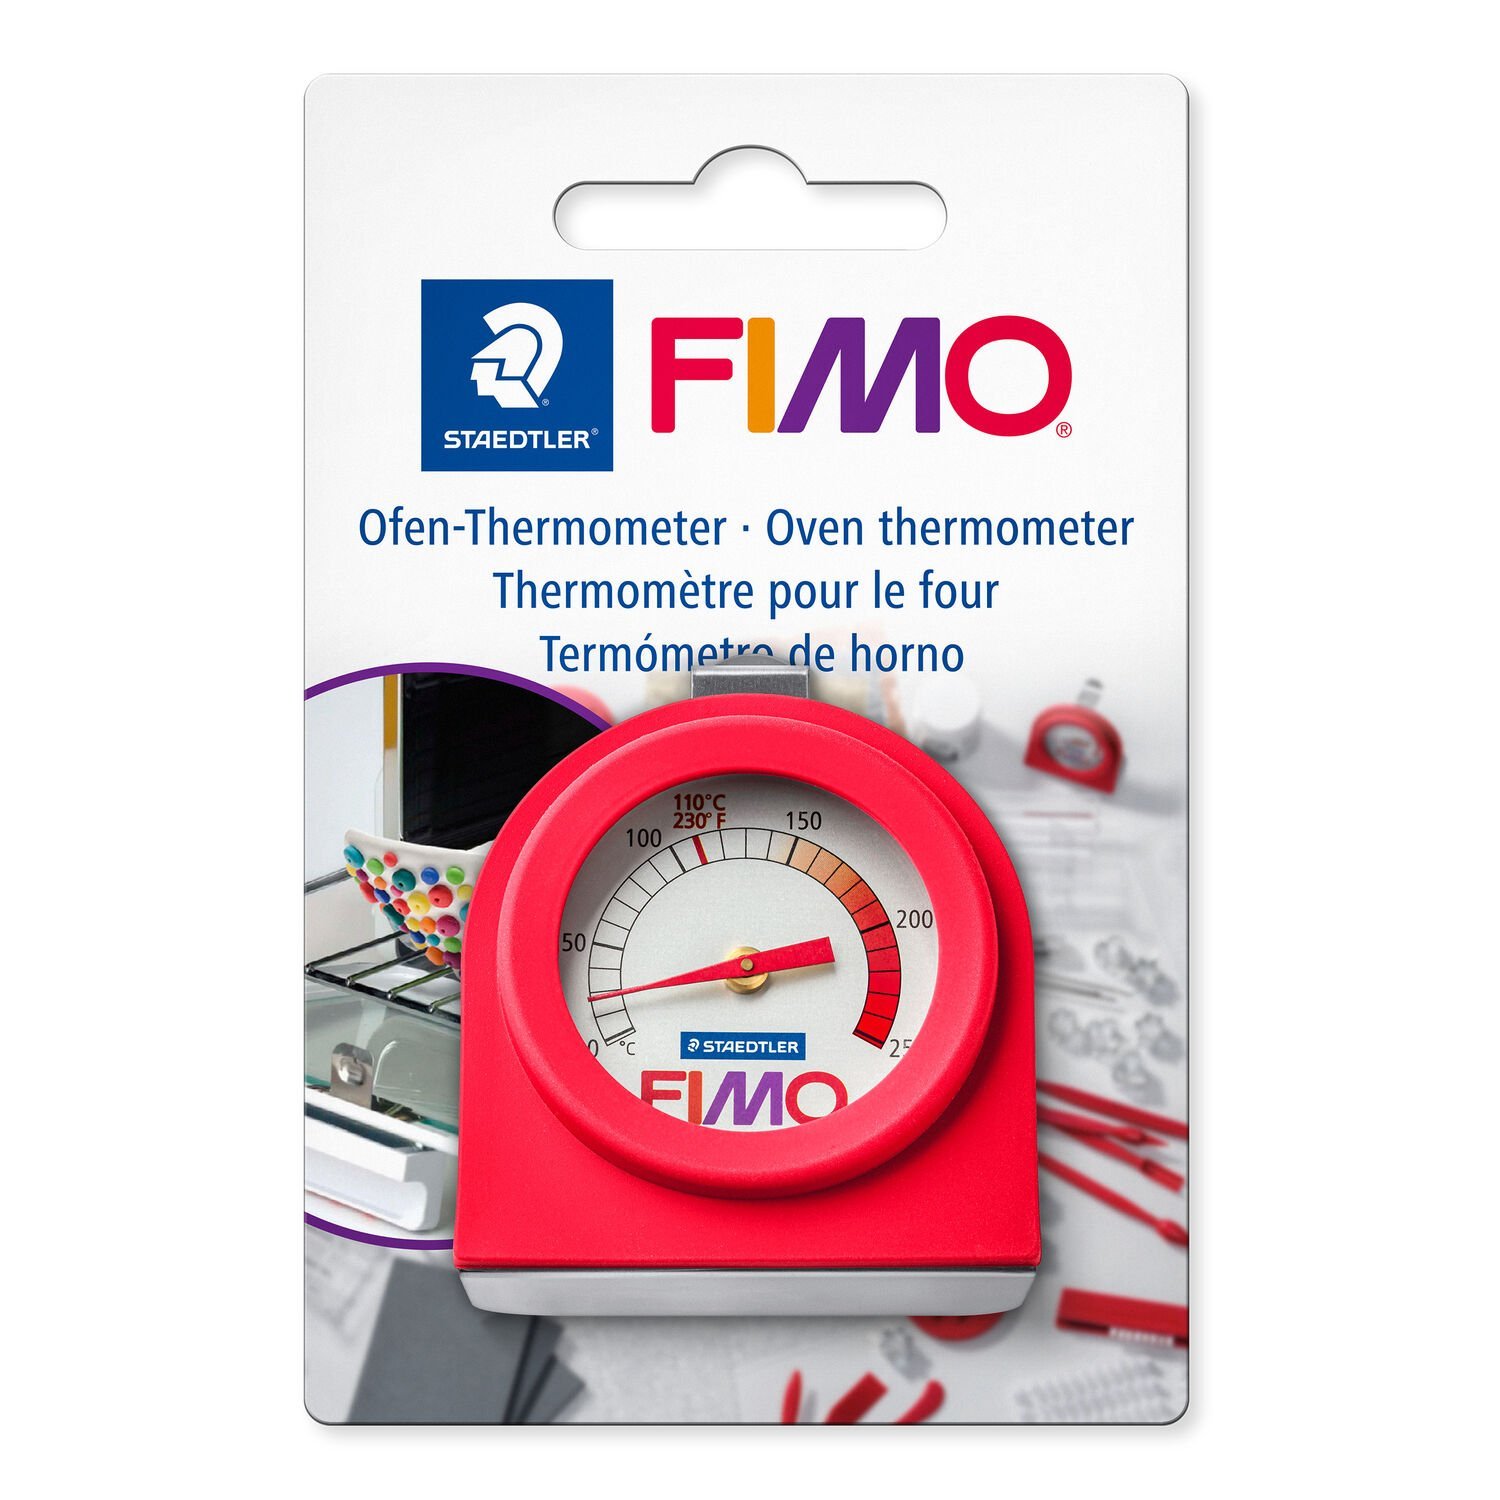 Blistercard containing 1 Oven thermometer